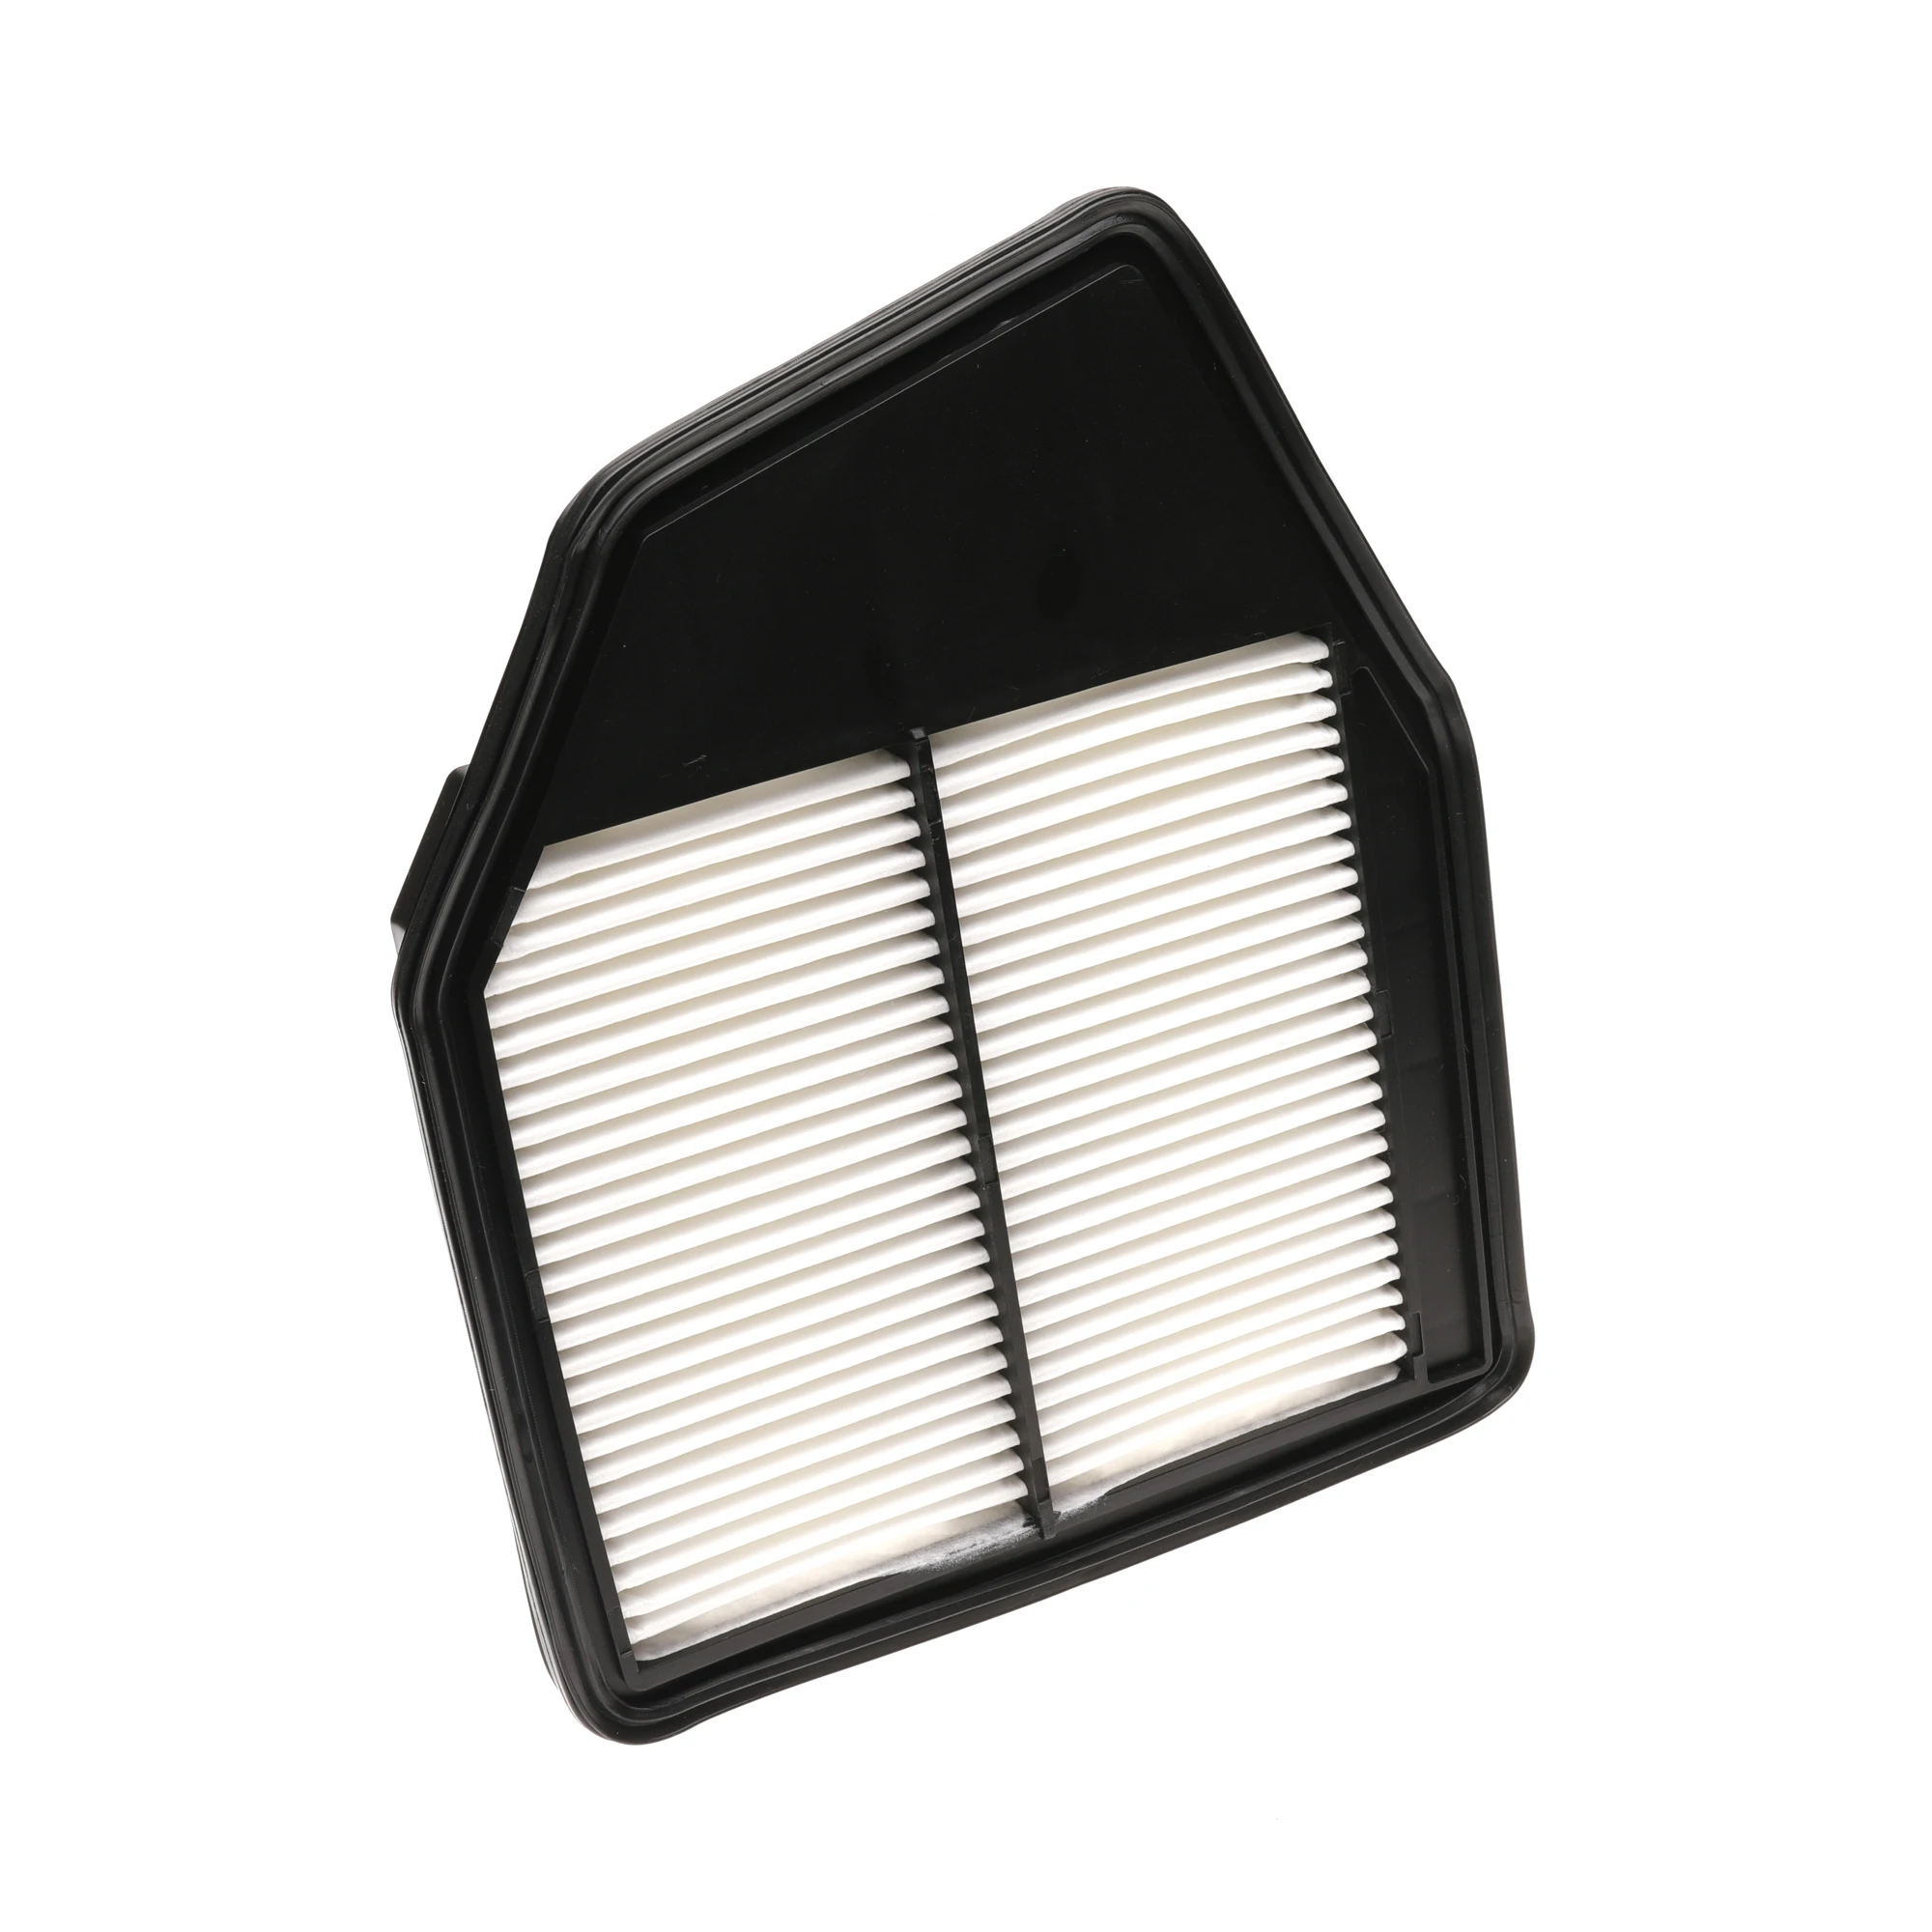 

Engine Air Filter CA10467 Replacement Filter for 2008-2015 Honda Accord and Crosstour, High Performance, Premium, Washable